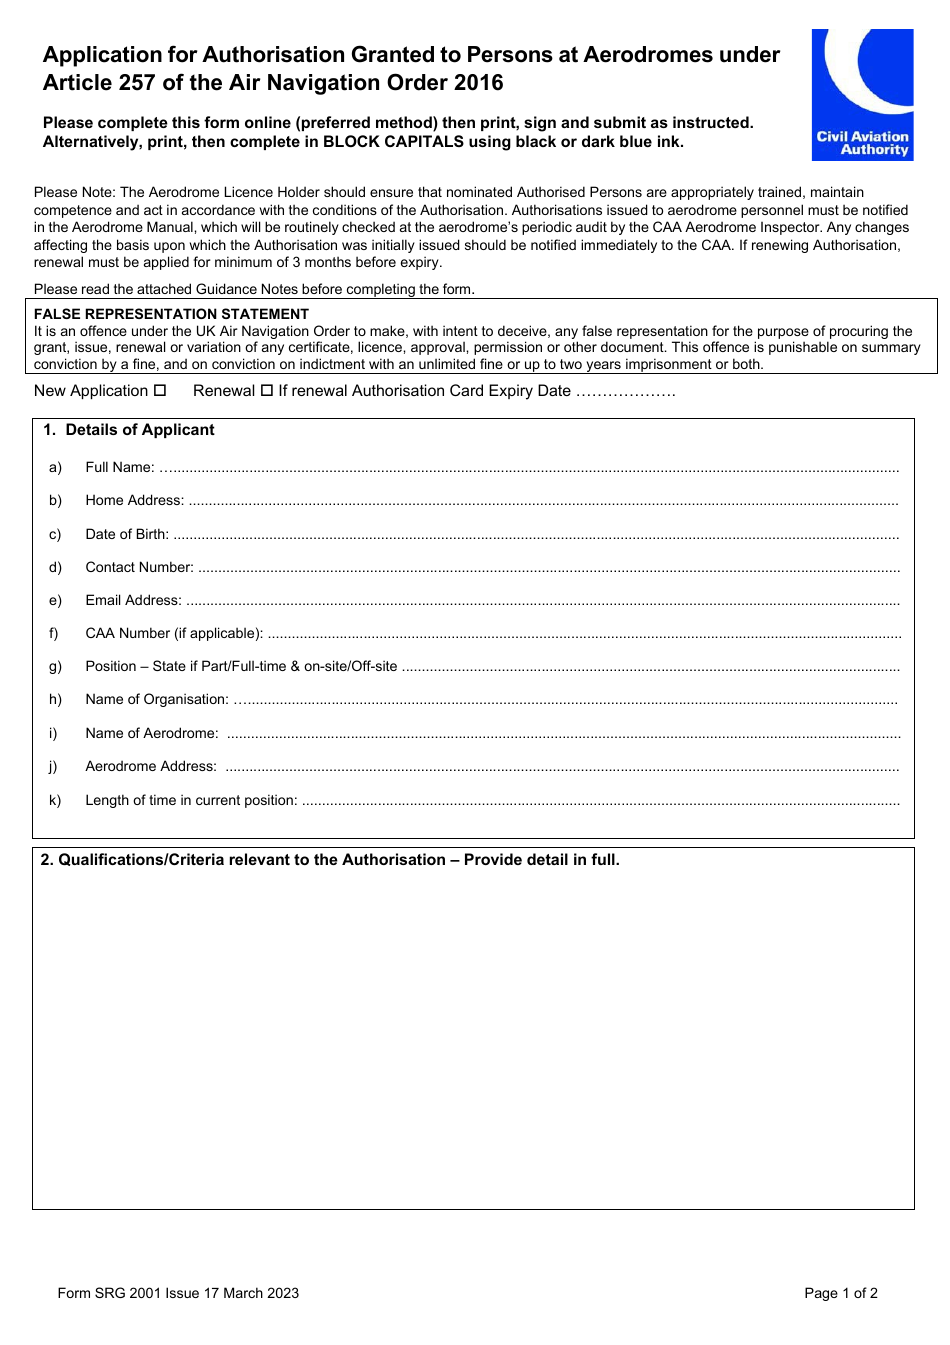 Form SRG2001 Application for Authorisation Granted to Persons at Aerodromes Under Article 257 of the Air Navigation Order 2016 - United Kingdom, Page 1